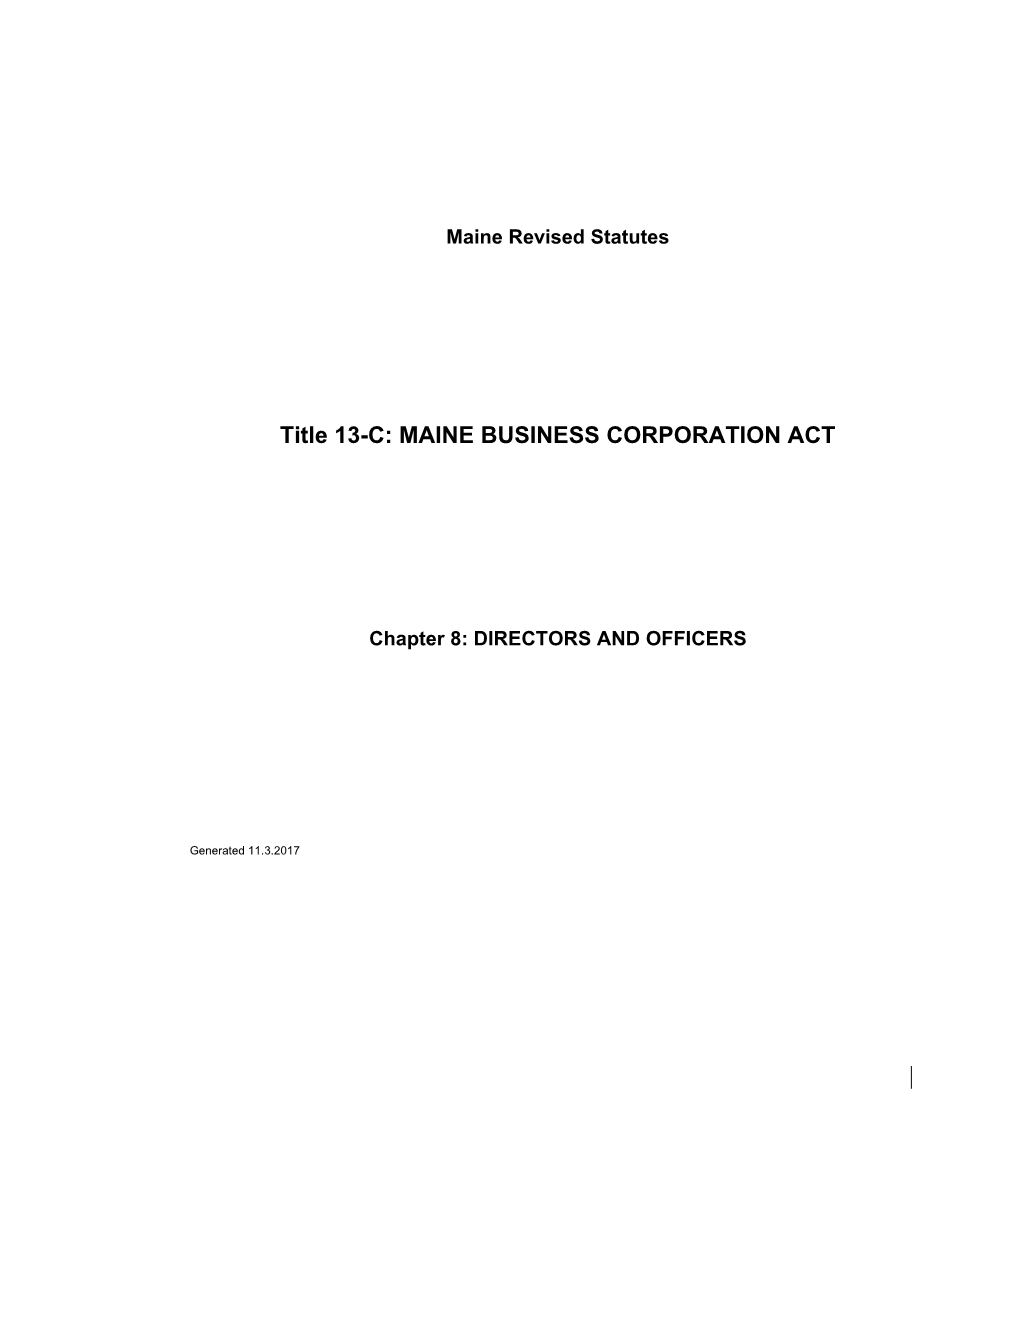 Title 13-C: MAINE BUSINESS CORPORATION ACT